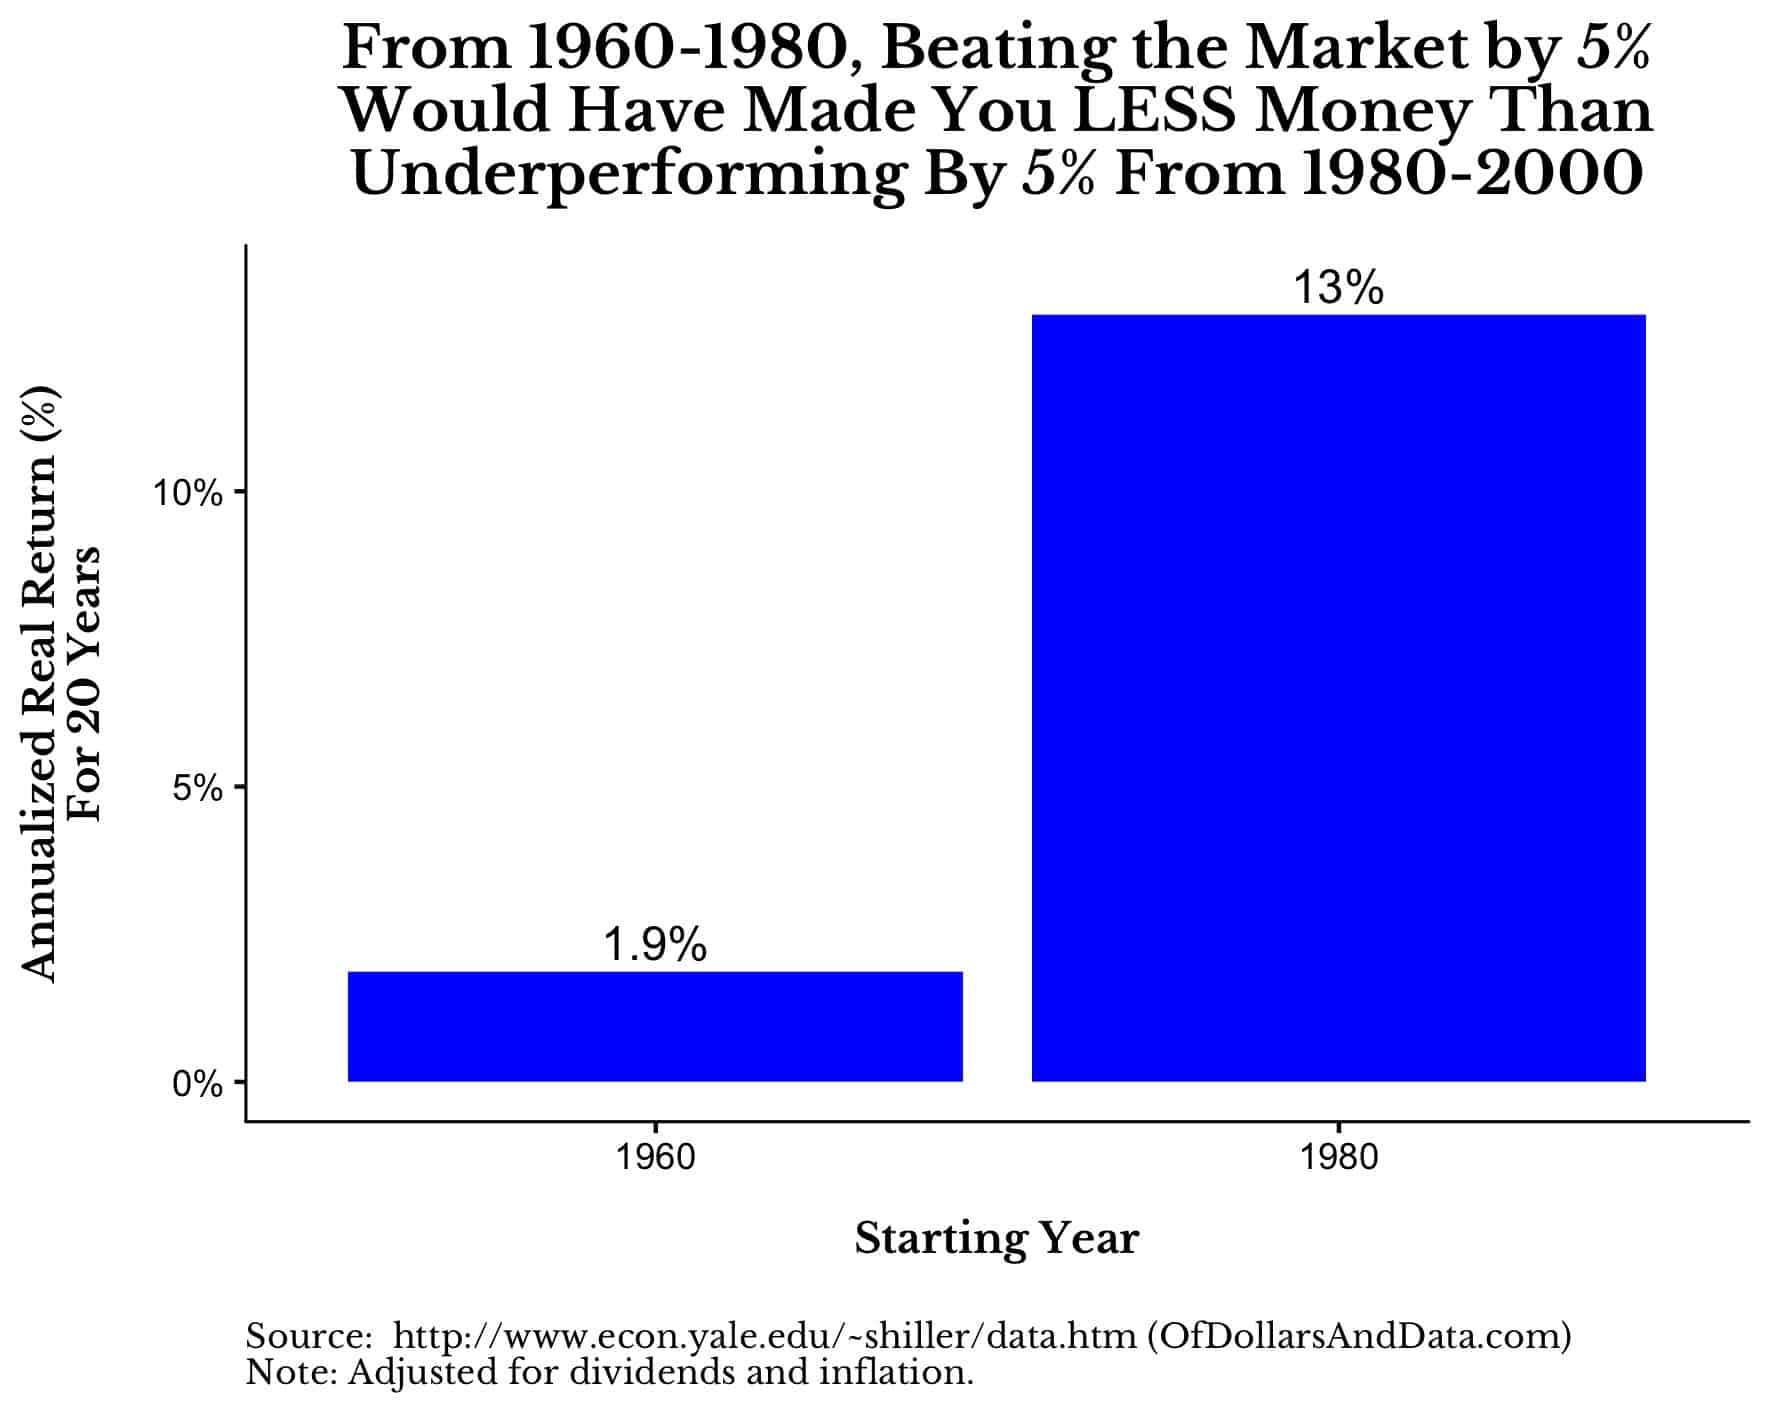 Chart showing that beating the US stock market by 5% per year from 1960-1980 would have made you less money than underperforming by 5% per year from 1980-2000.